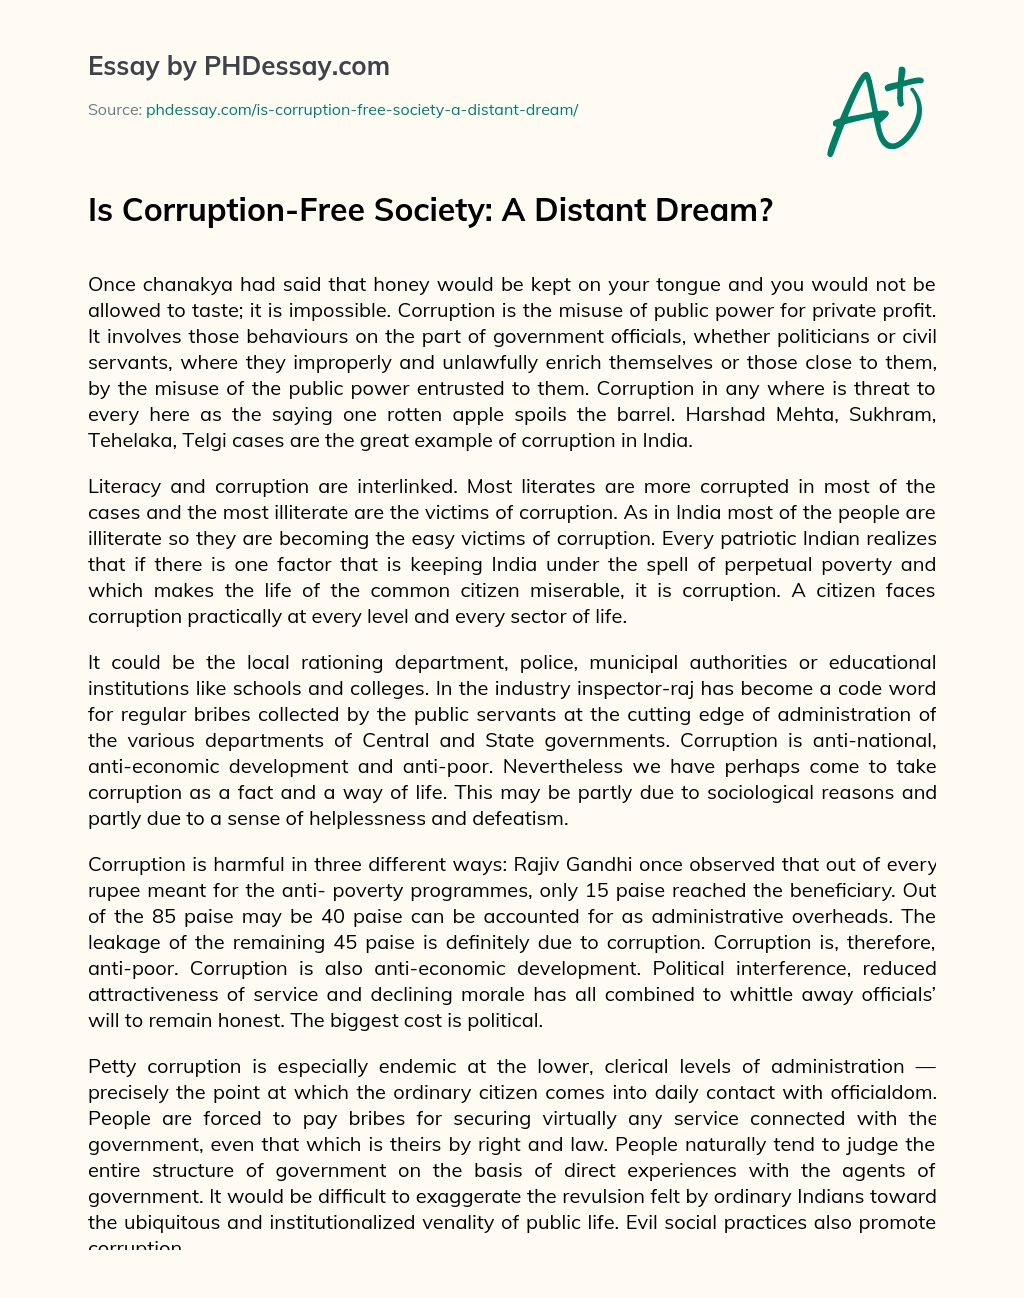 ﻿Is Corruption-Free Society: A Distant Dream? essay